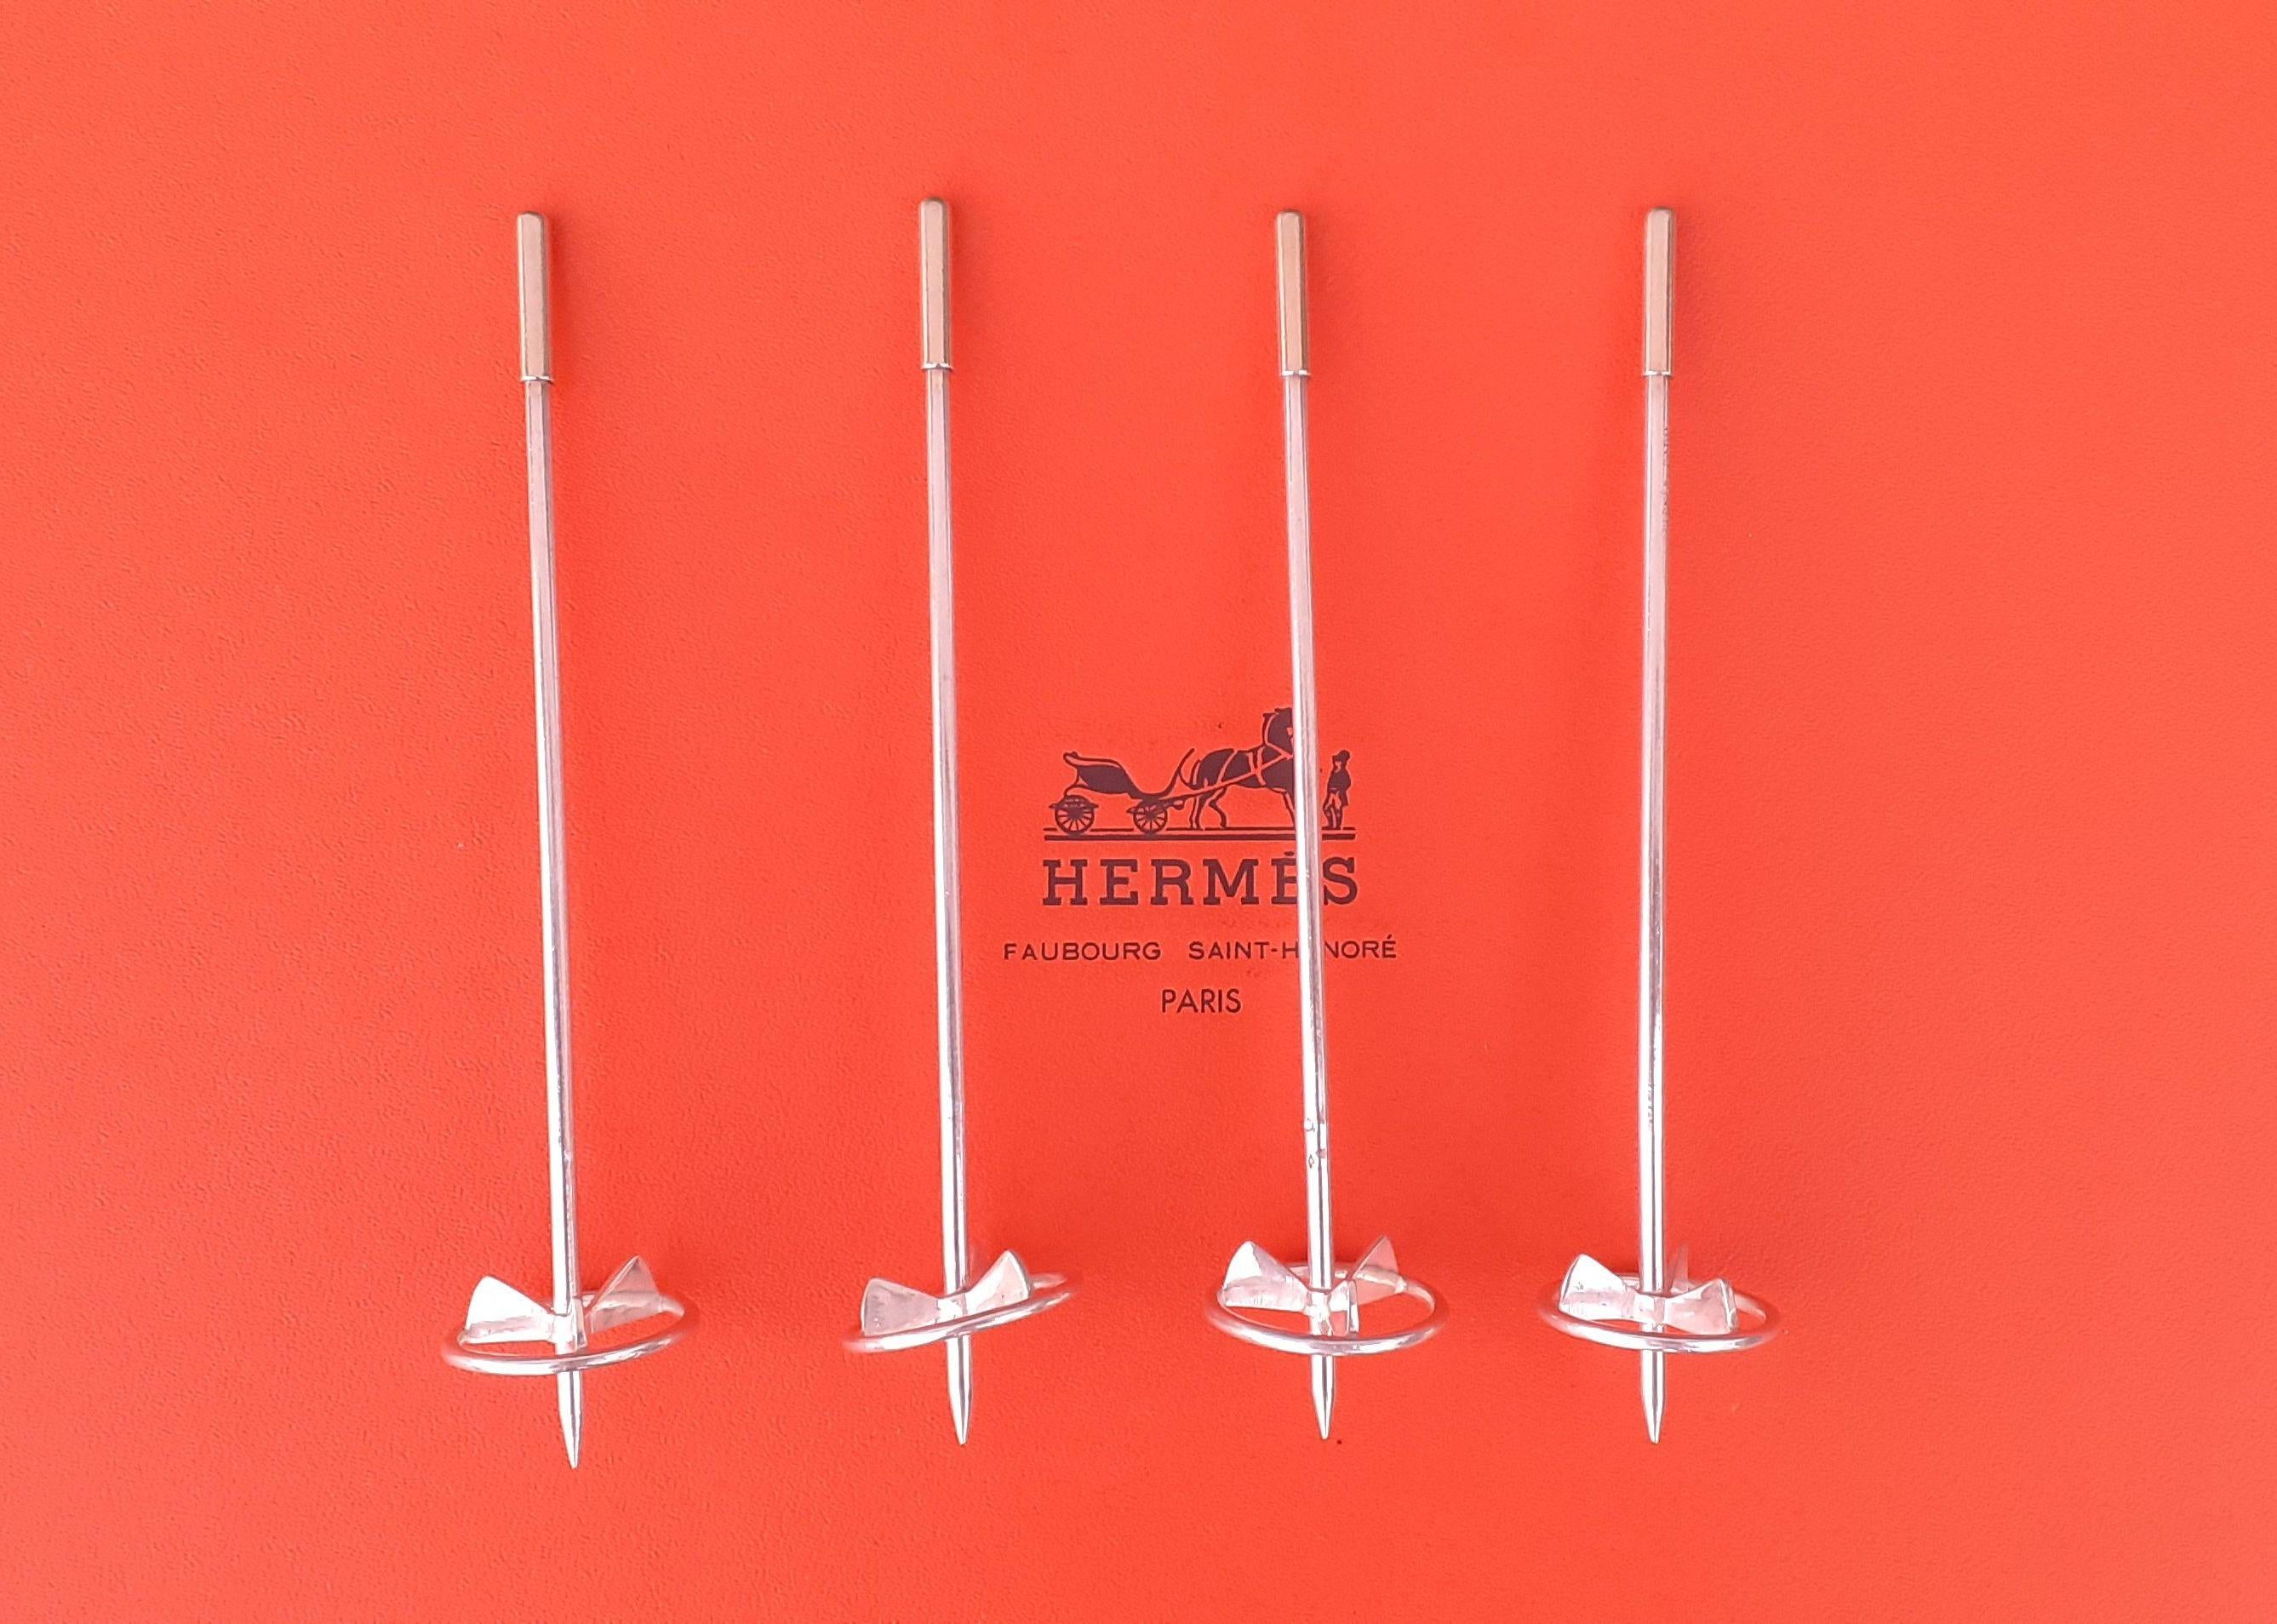 Stunning Authentic Hermès Cocktail Stirrers

Can be used as Champagne whip or swizzle-stick  to remove the bubbles from fizzy drinks

In shape of Ski Poles

The set includes 4 pieces

Vintage Item

The sticks are in silver and the ends in silver